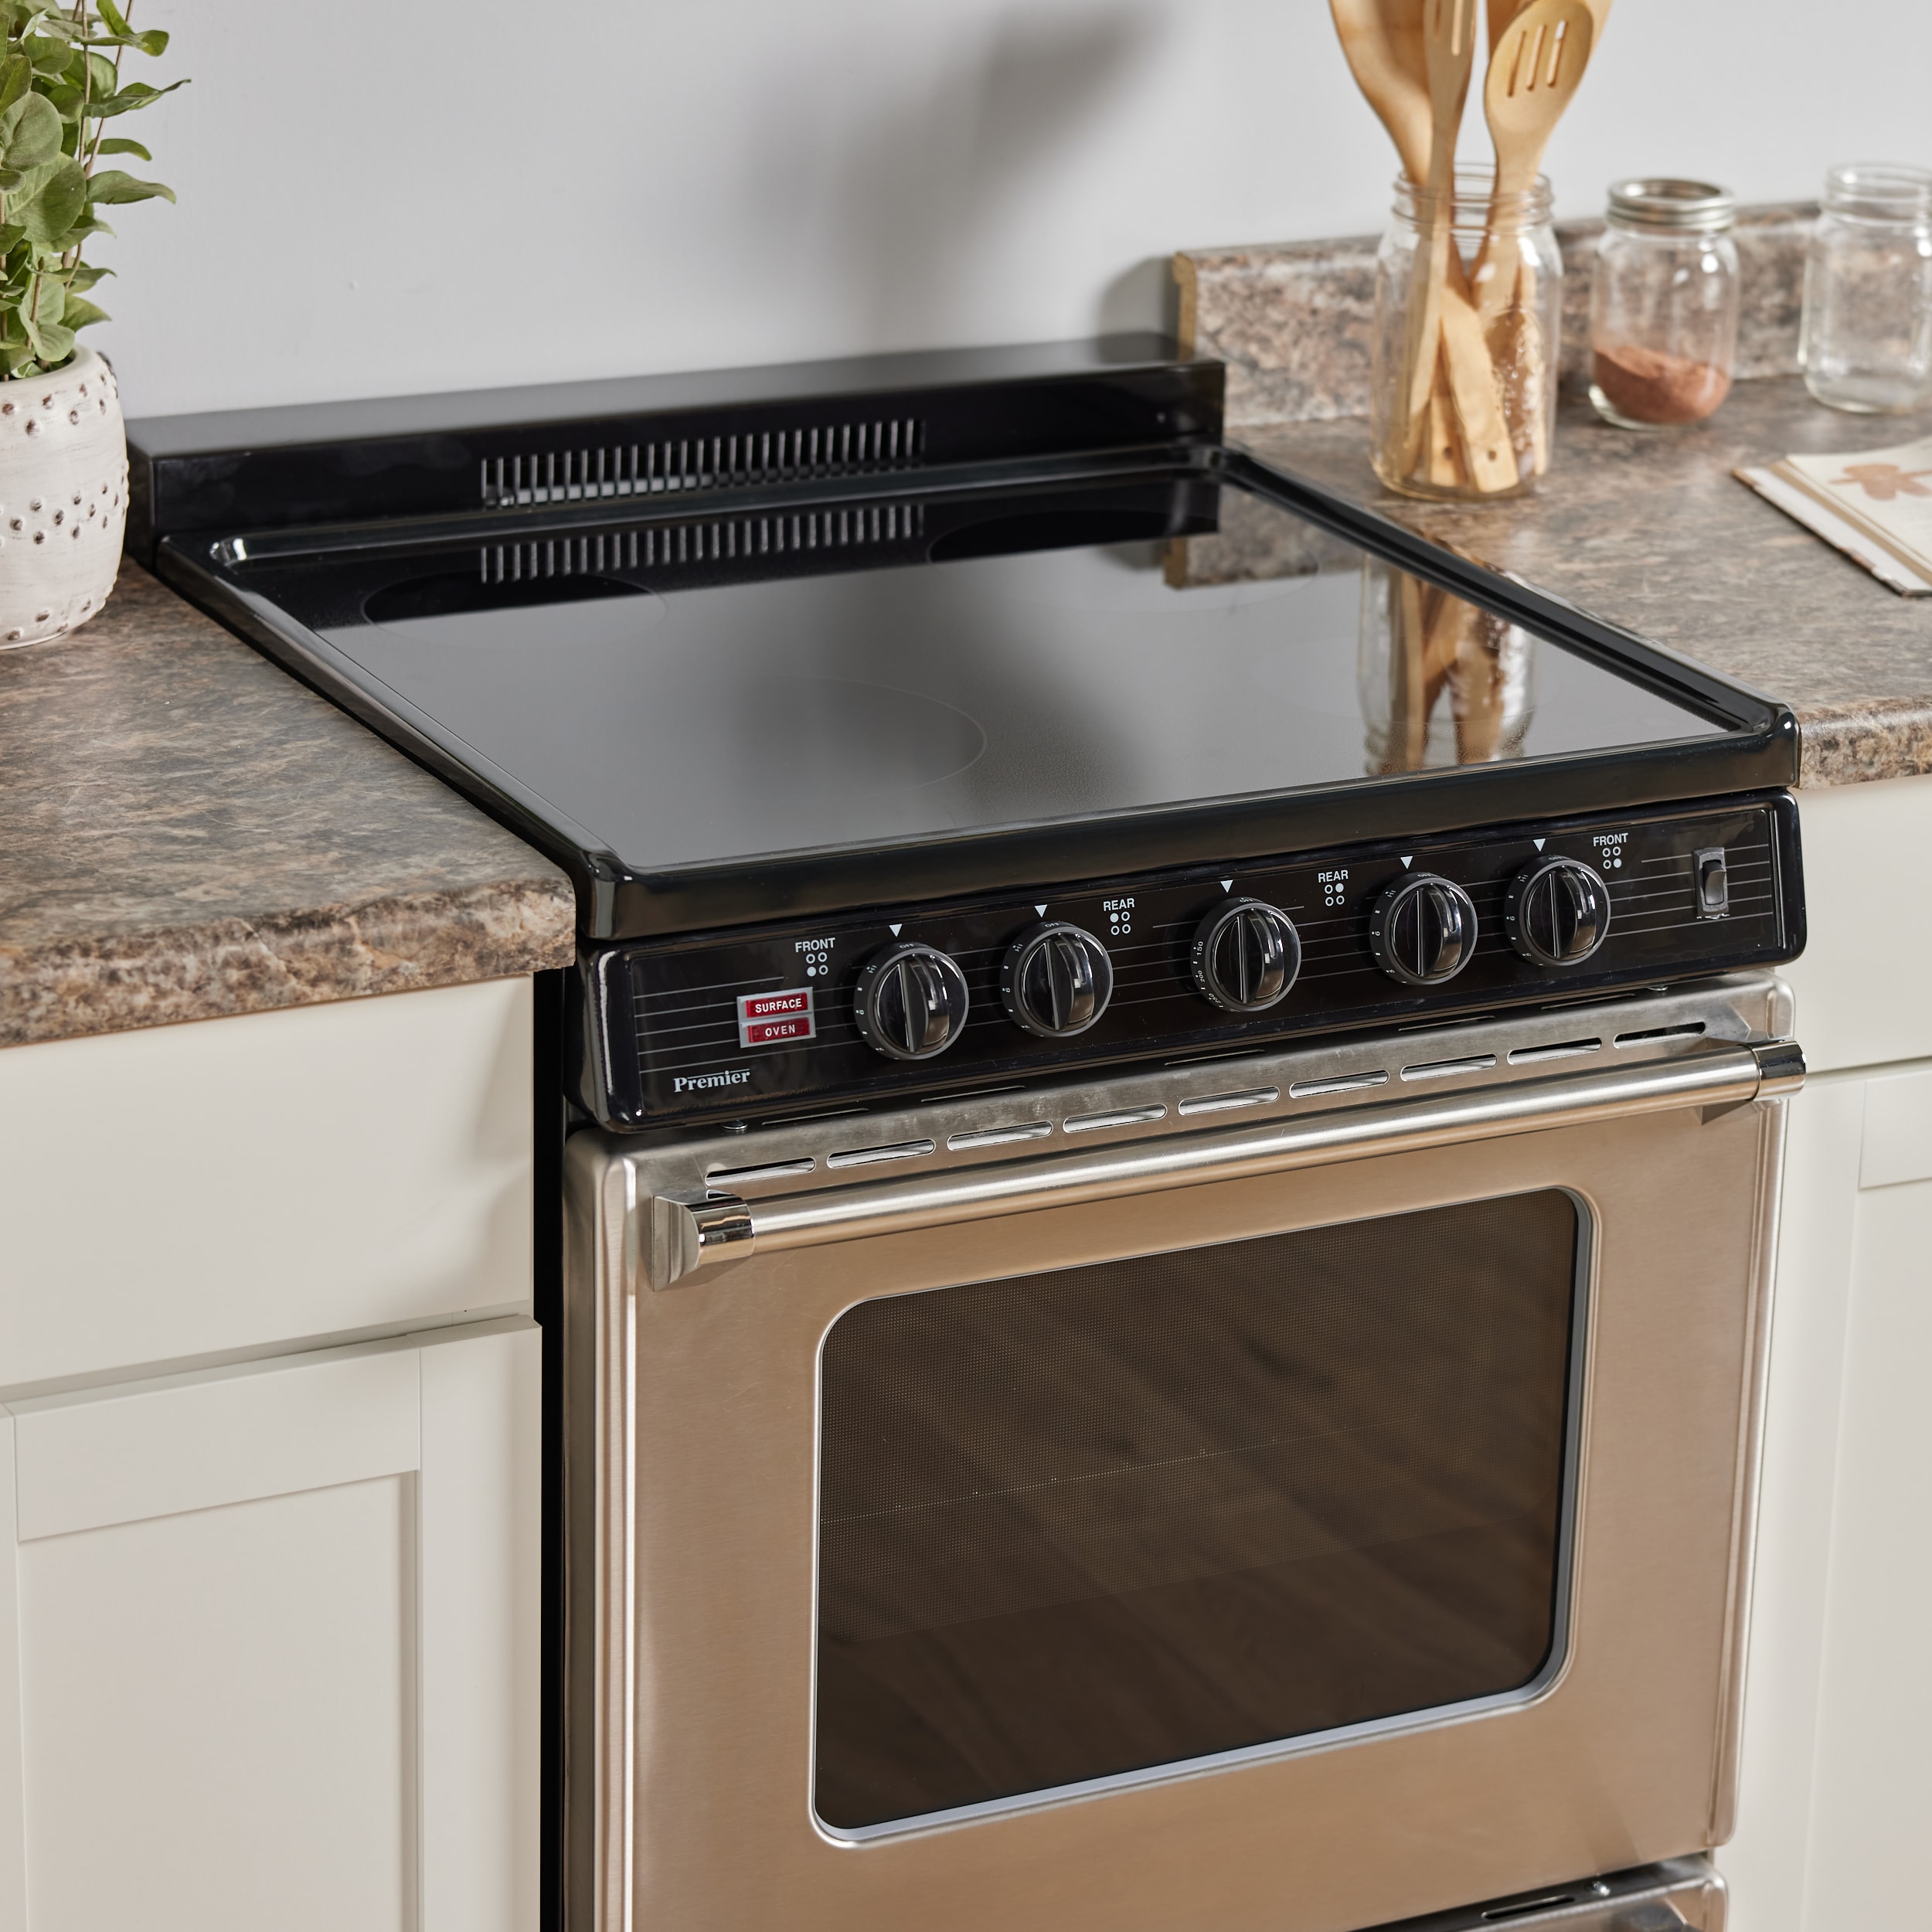 GE 24-in Glass Top 4 Burners 2.9-cu ft Steam Cleaning Freestanding